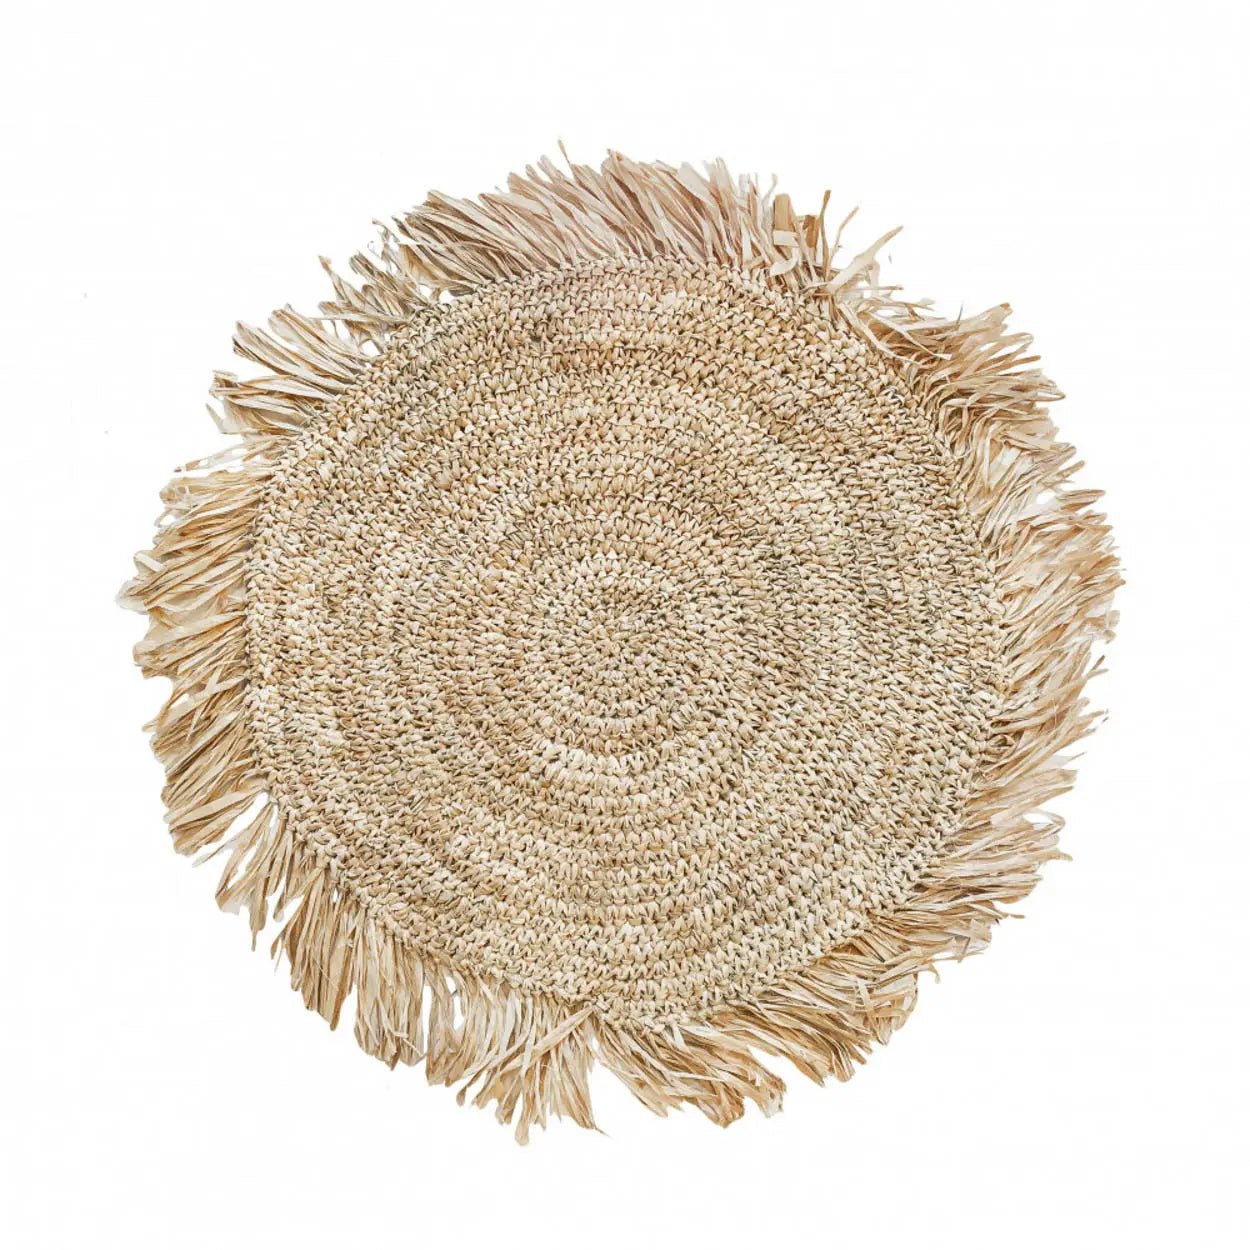 ‘The Fringe’ Raffia Placemat, Round (Natural) - EcoLuxe Furnishings